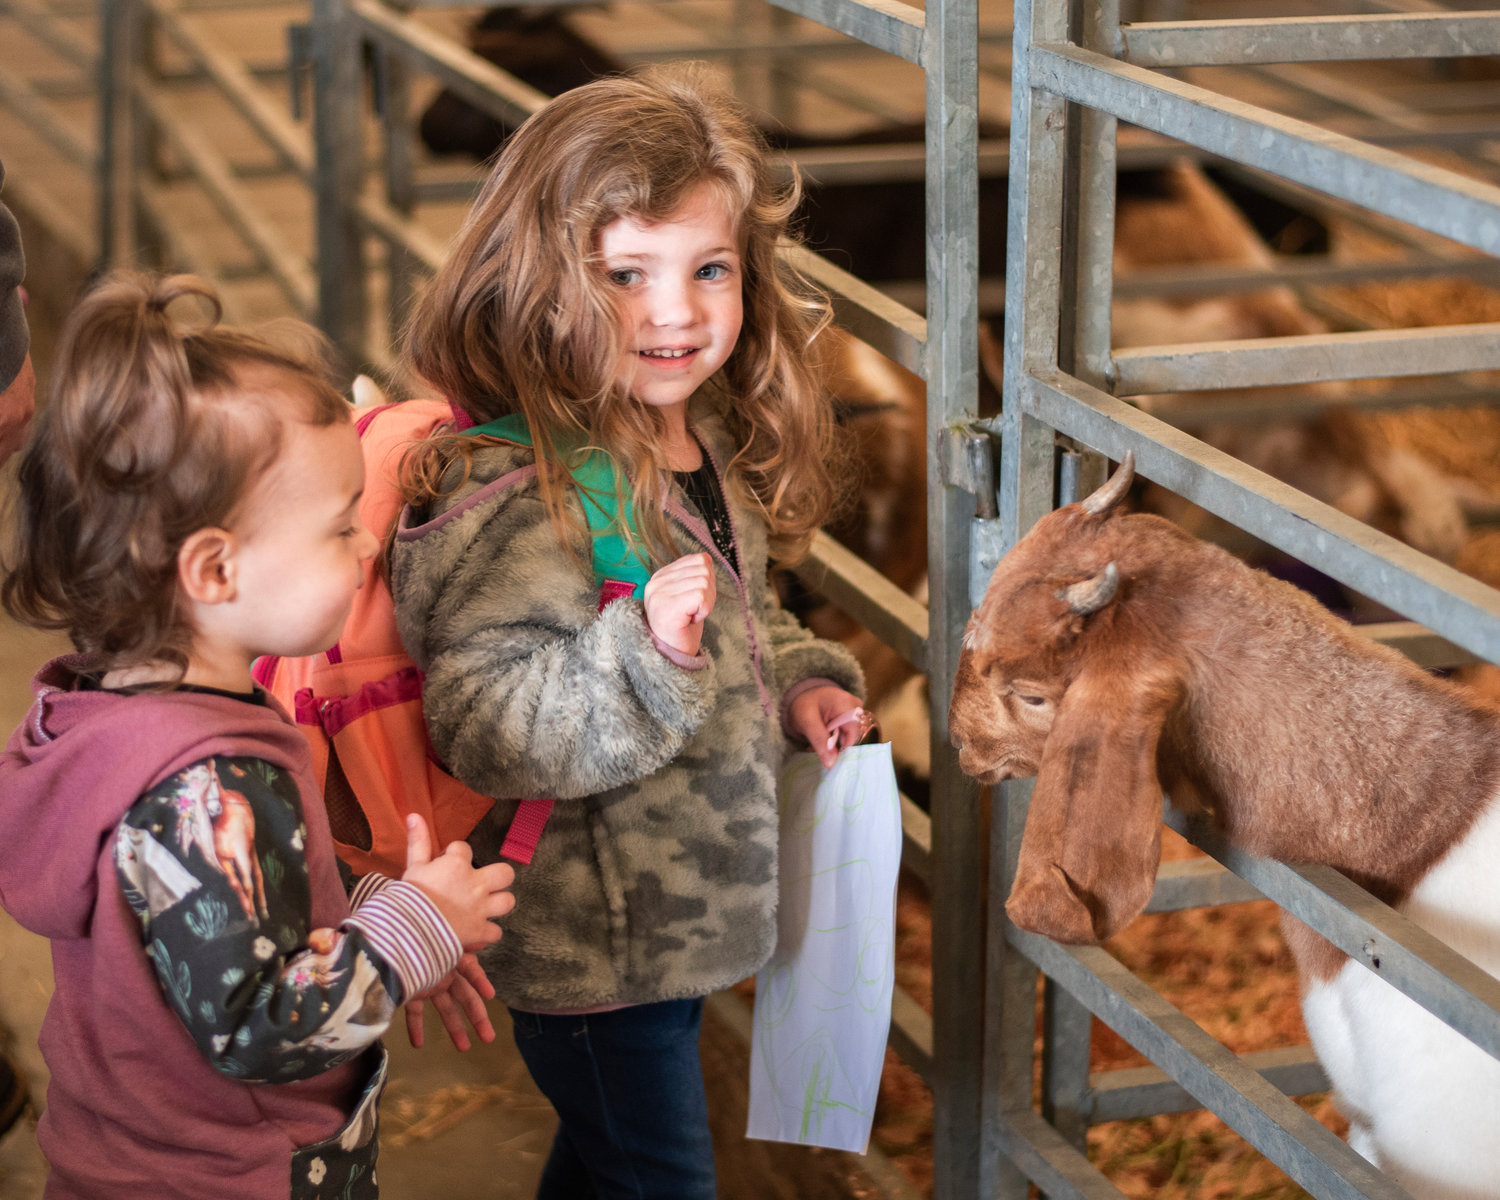 Adalynn, 2, and Nora, 4, smile while petting a goat at the fairgrounds before the Spring Youth Fair opening on Friday afternoon.